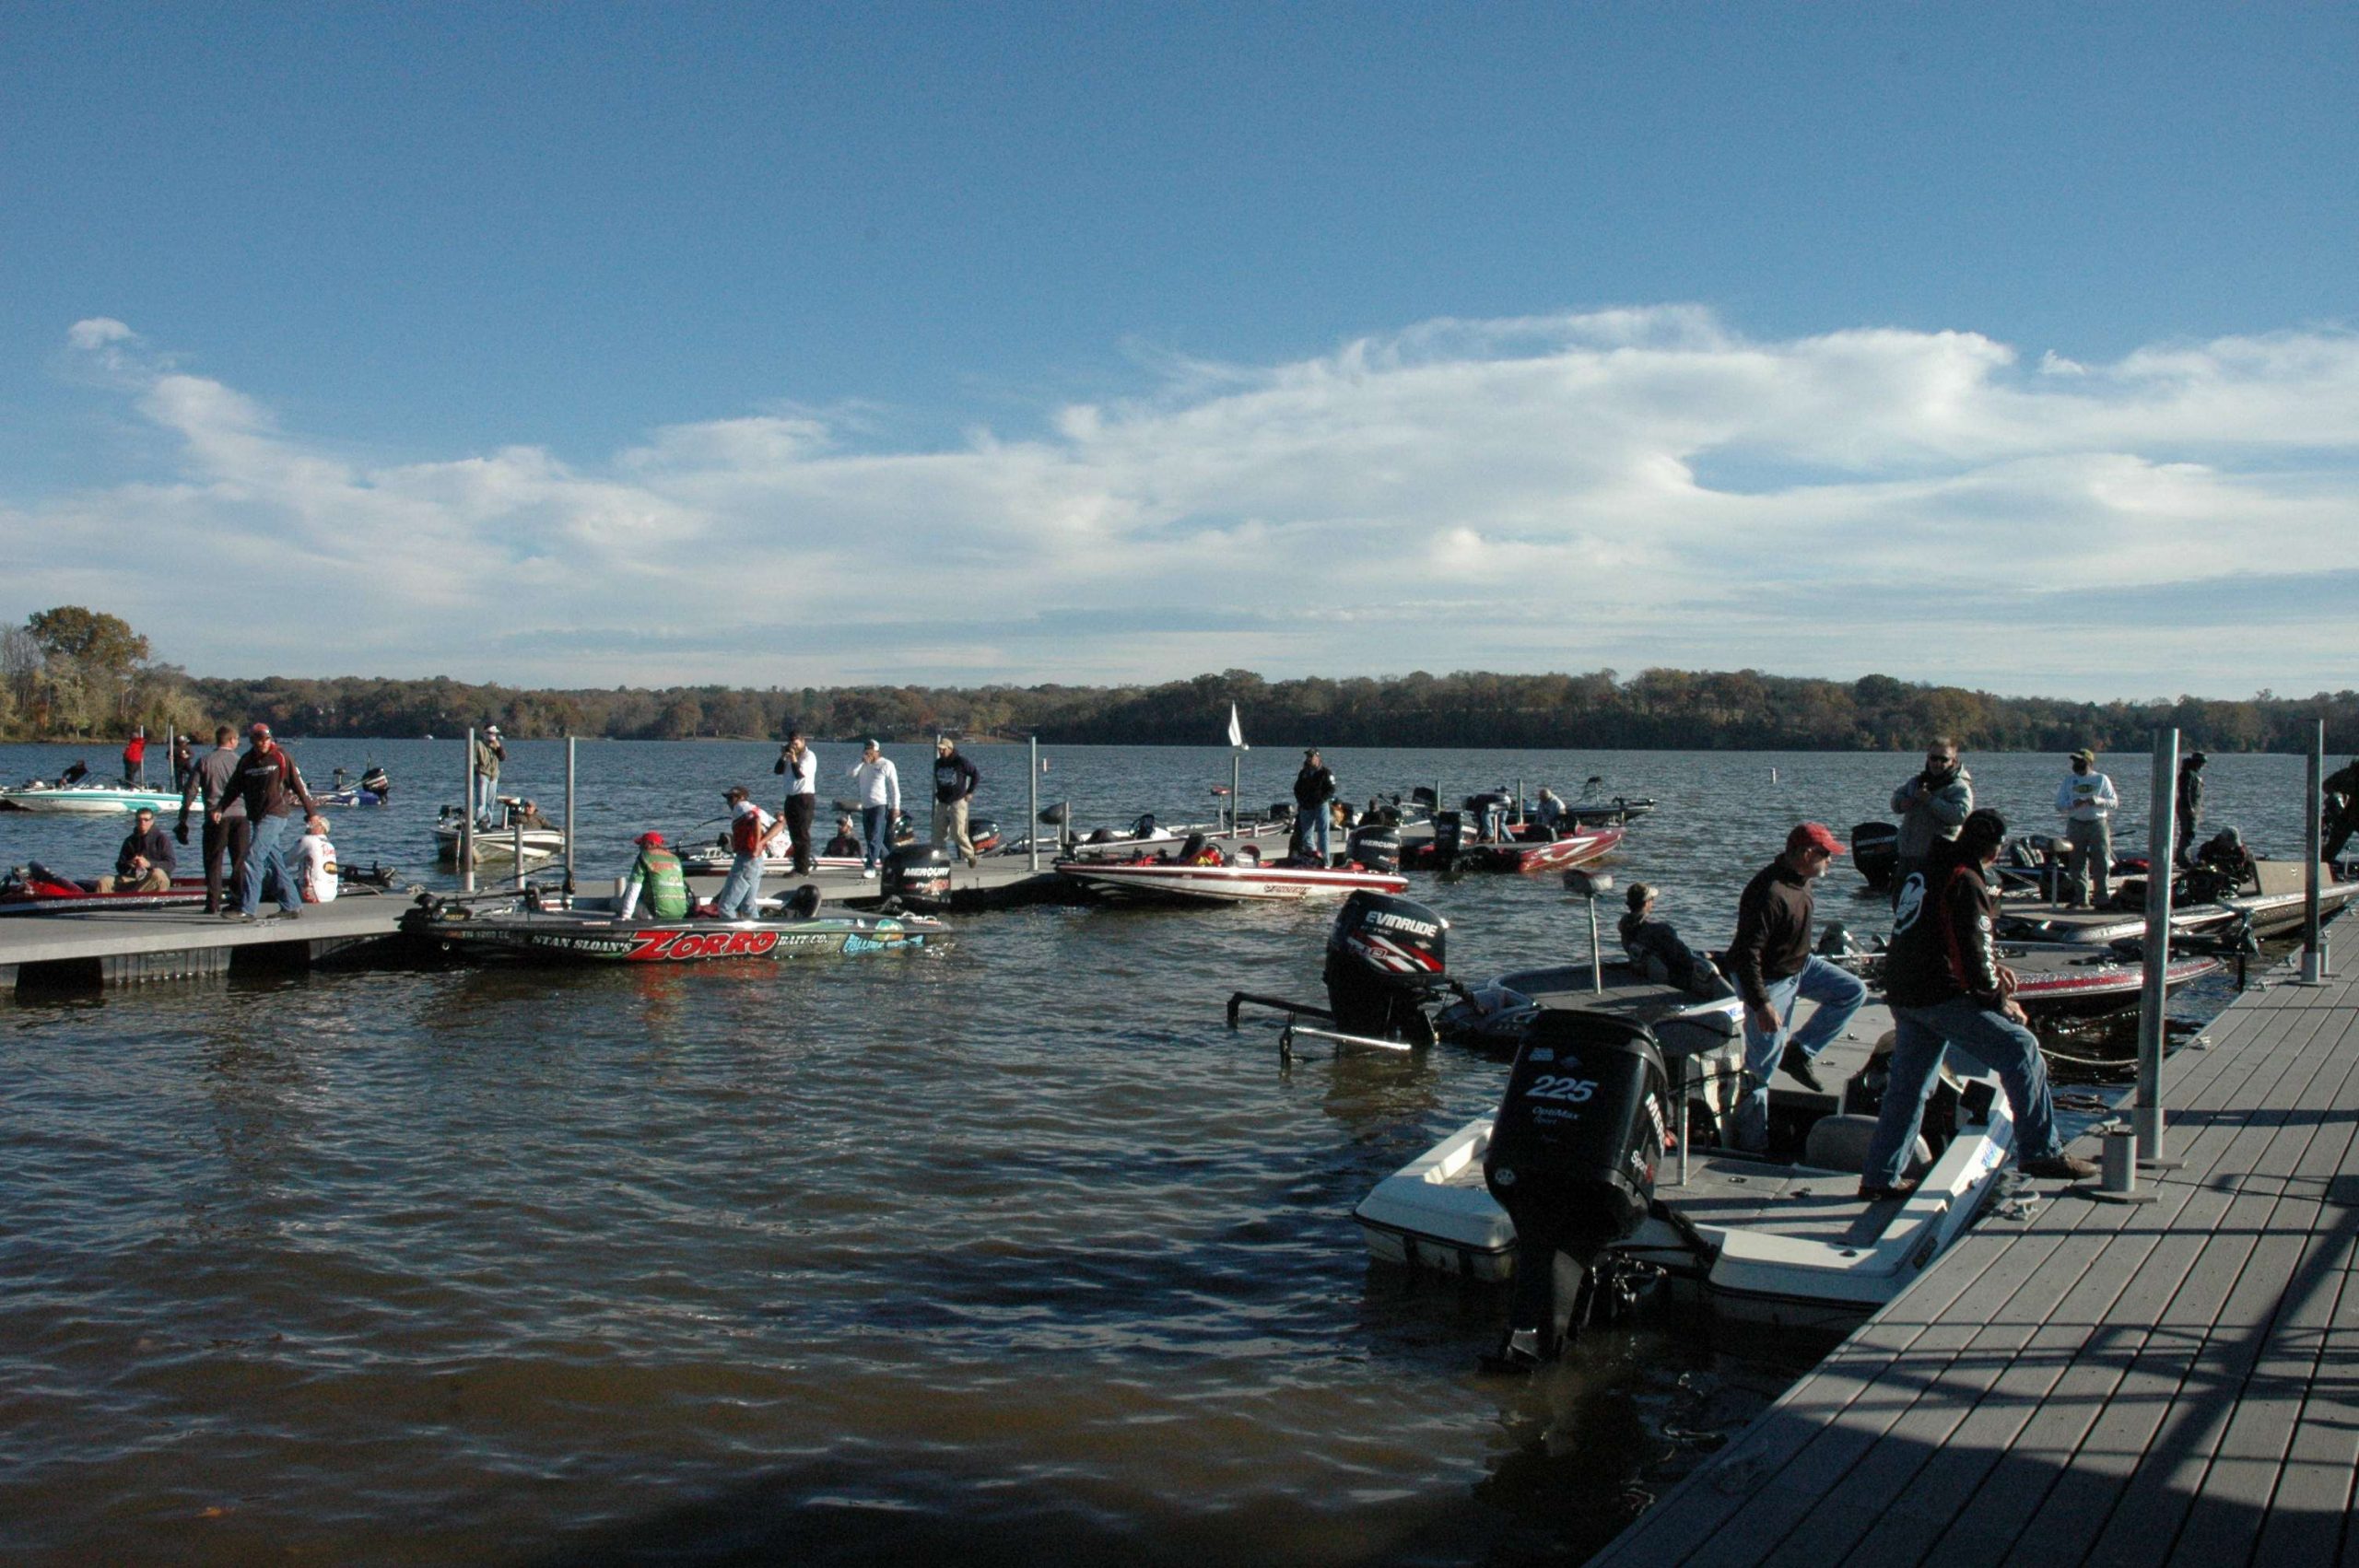 The top 25 anglers arrive at the docks for the final weigh-in to determine the champion and invitee to the 2014 Bassmaster Classic. 